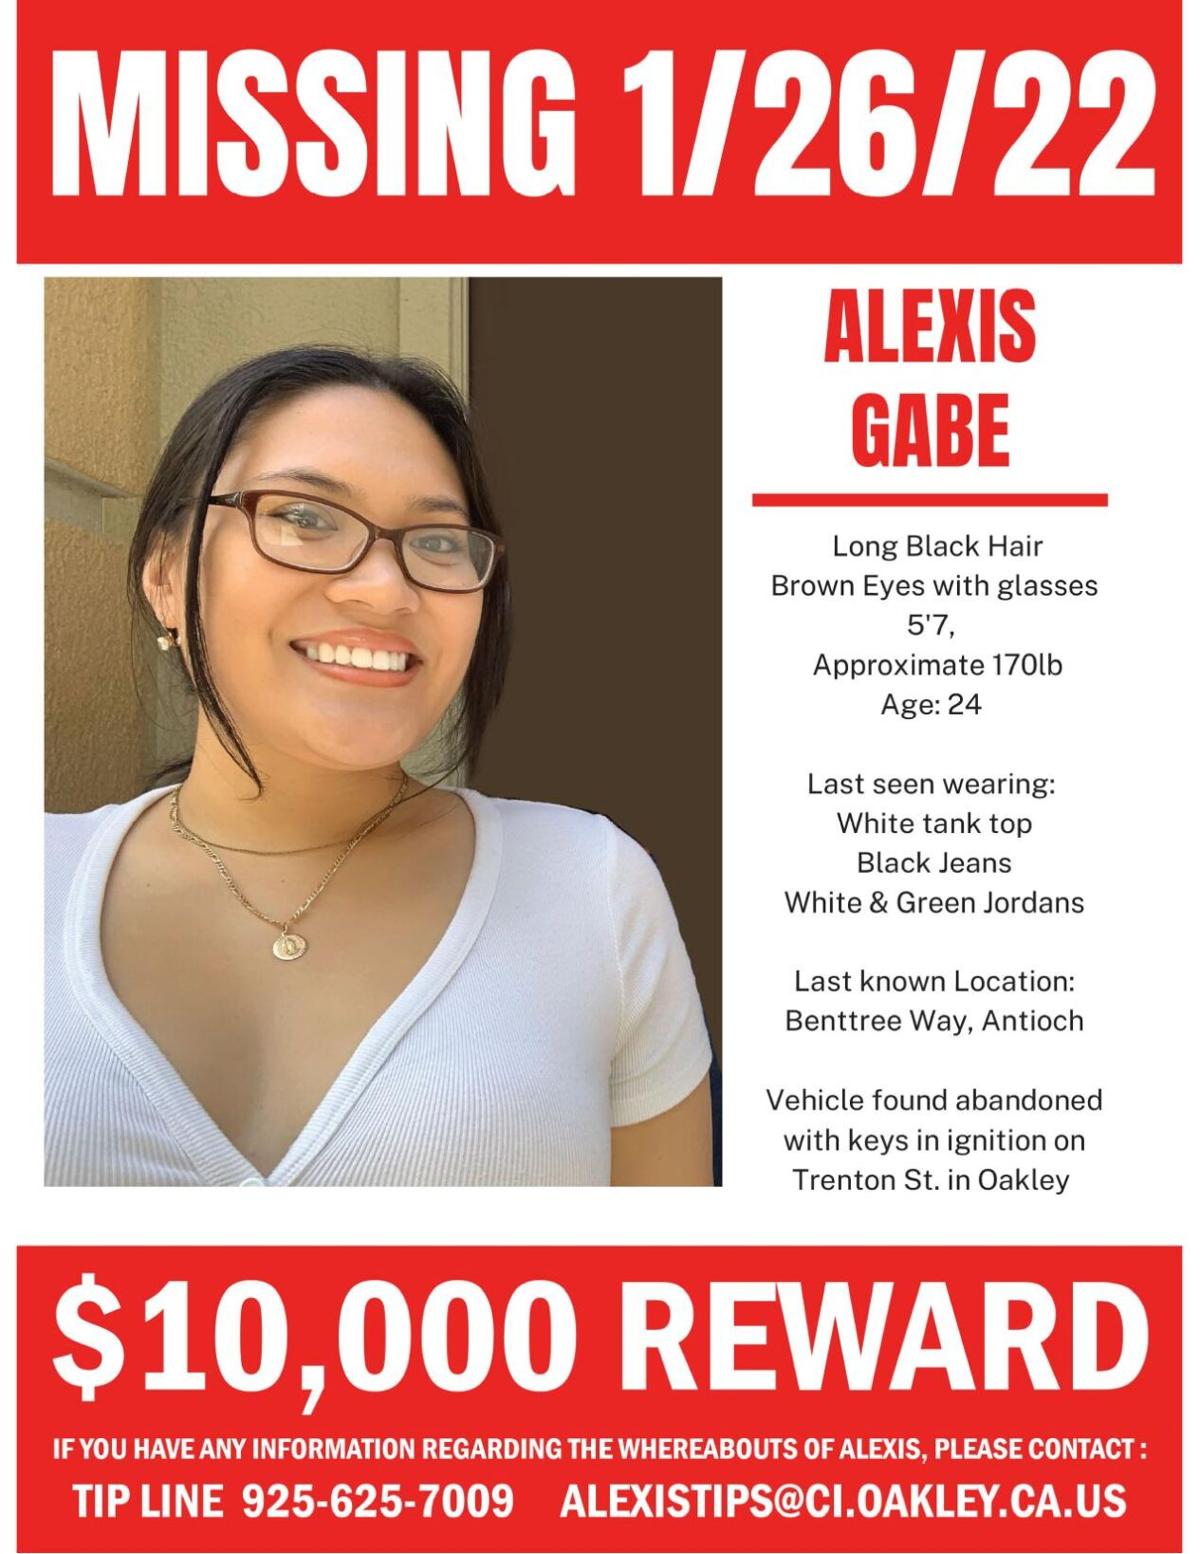 Oakley Police Department to hold news conference later this week on Alexis  Gabe case | News 